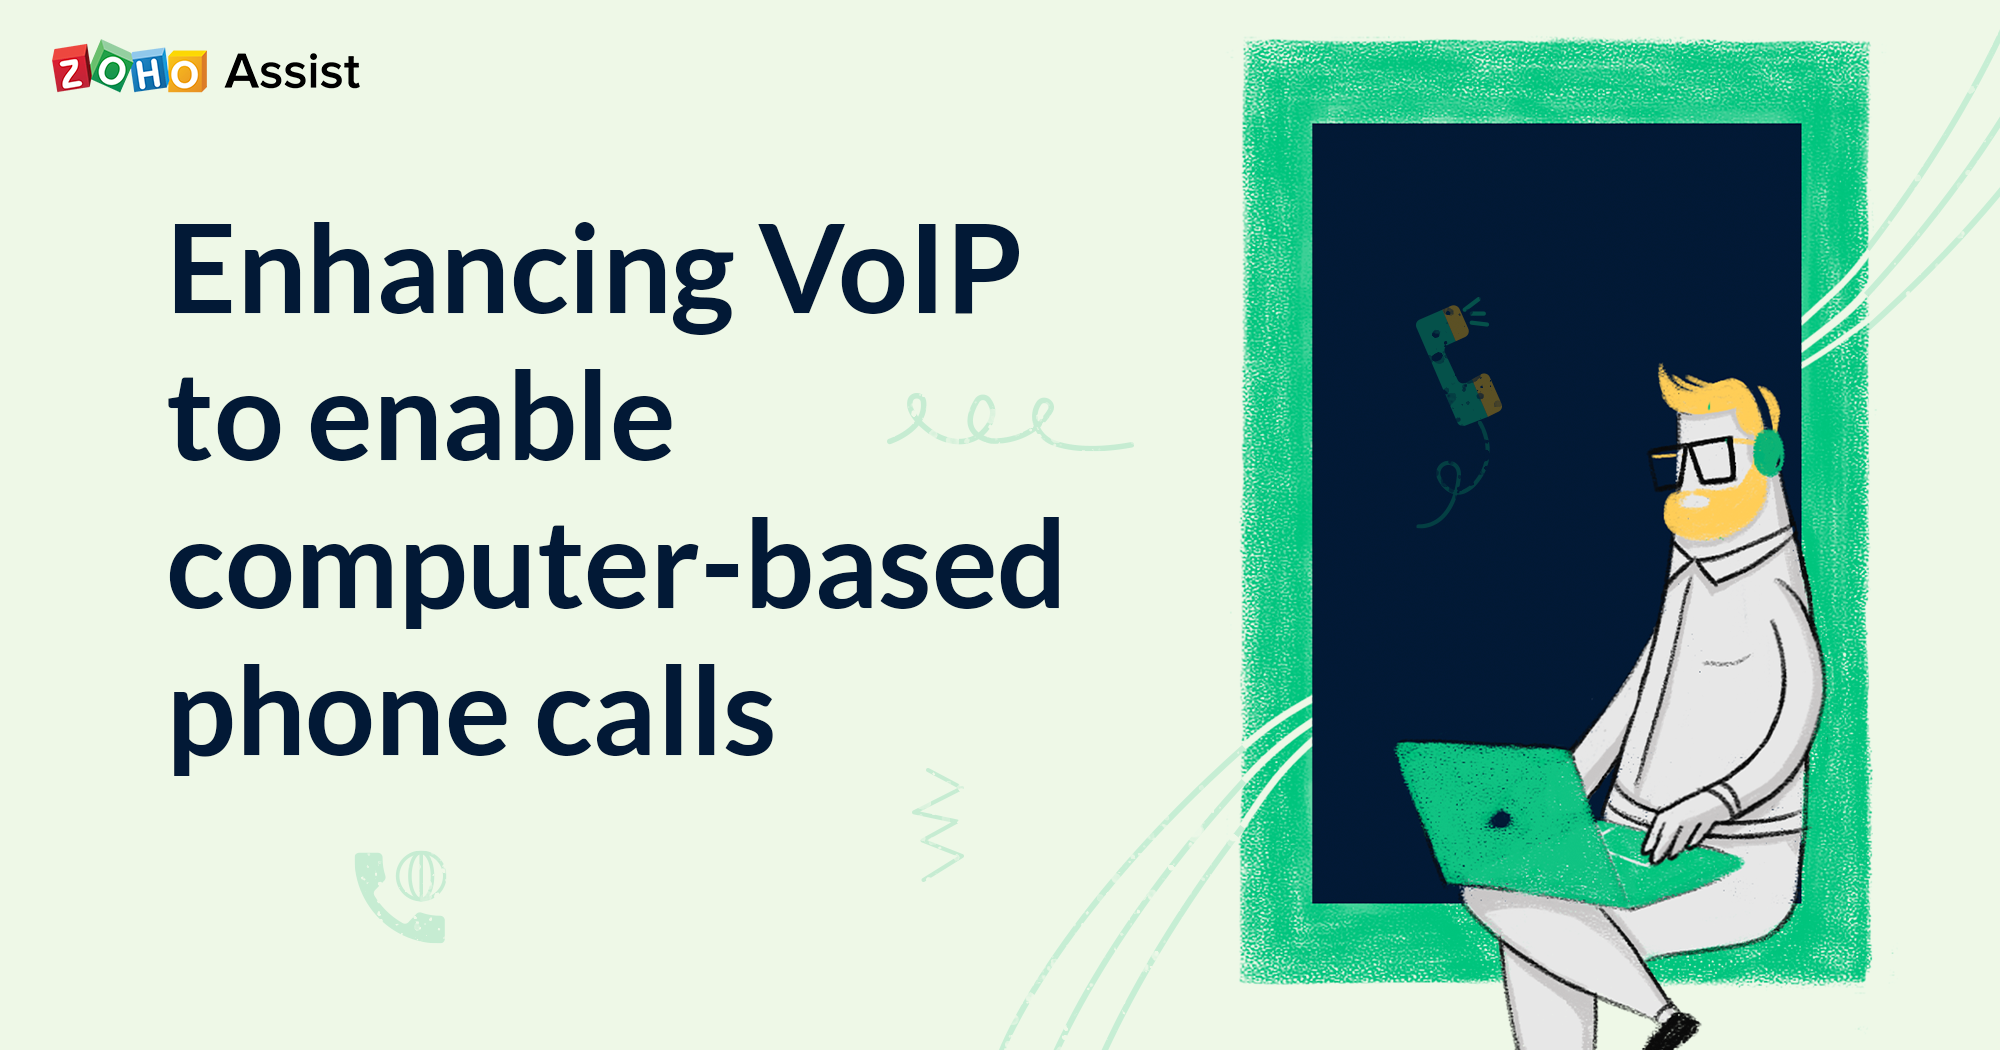 High Quality VoIP-based phone calls to enable constant communication